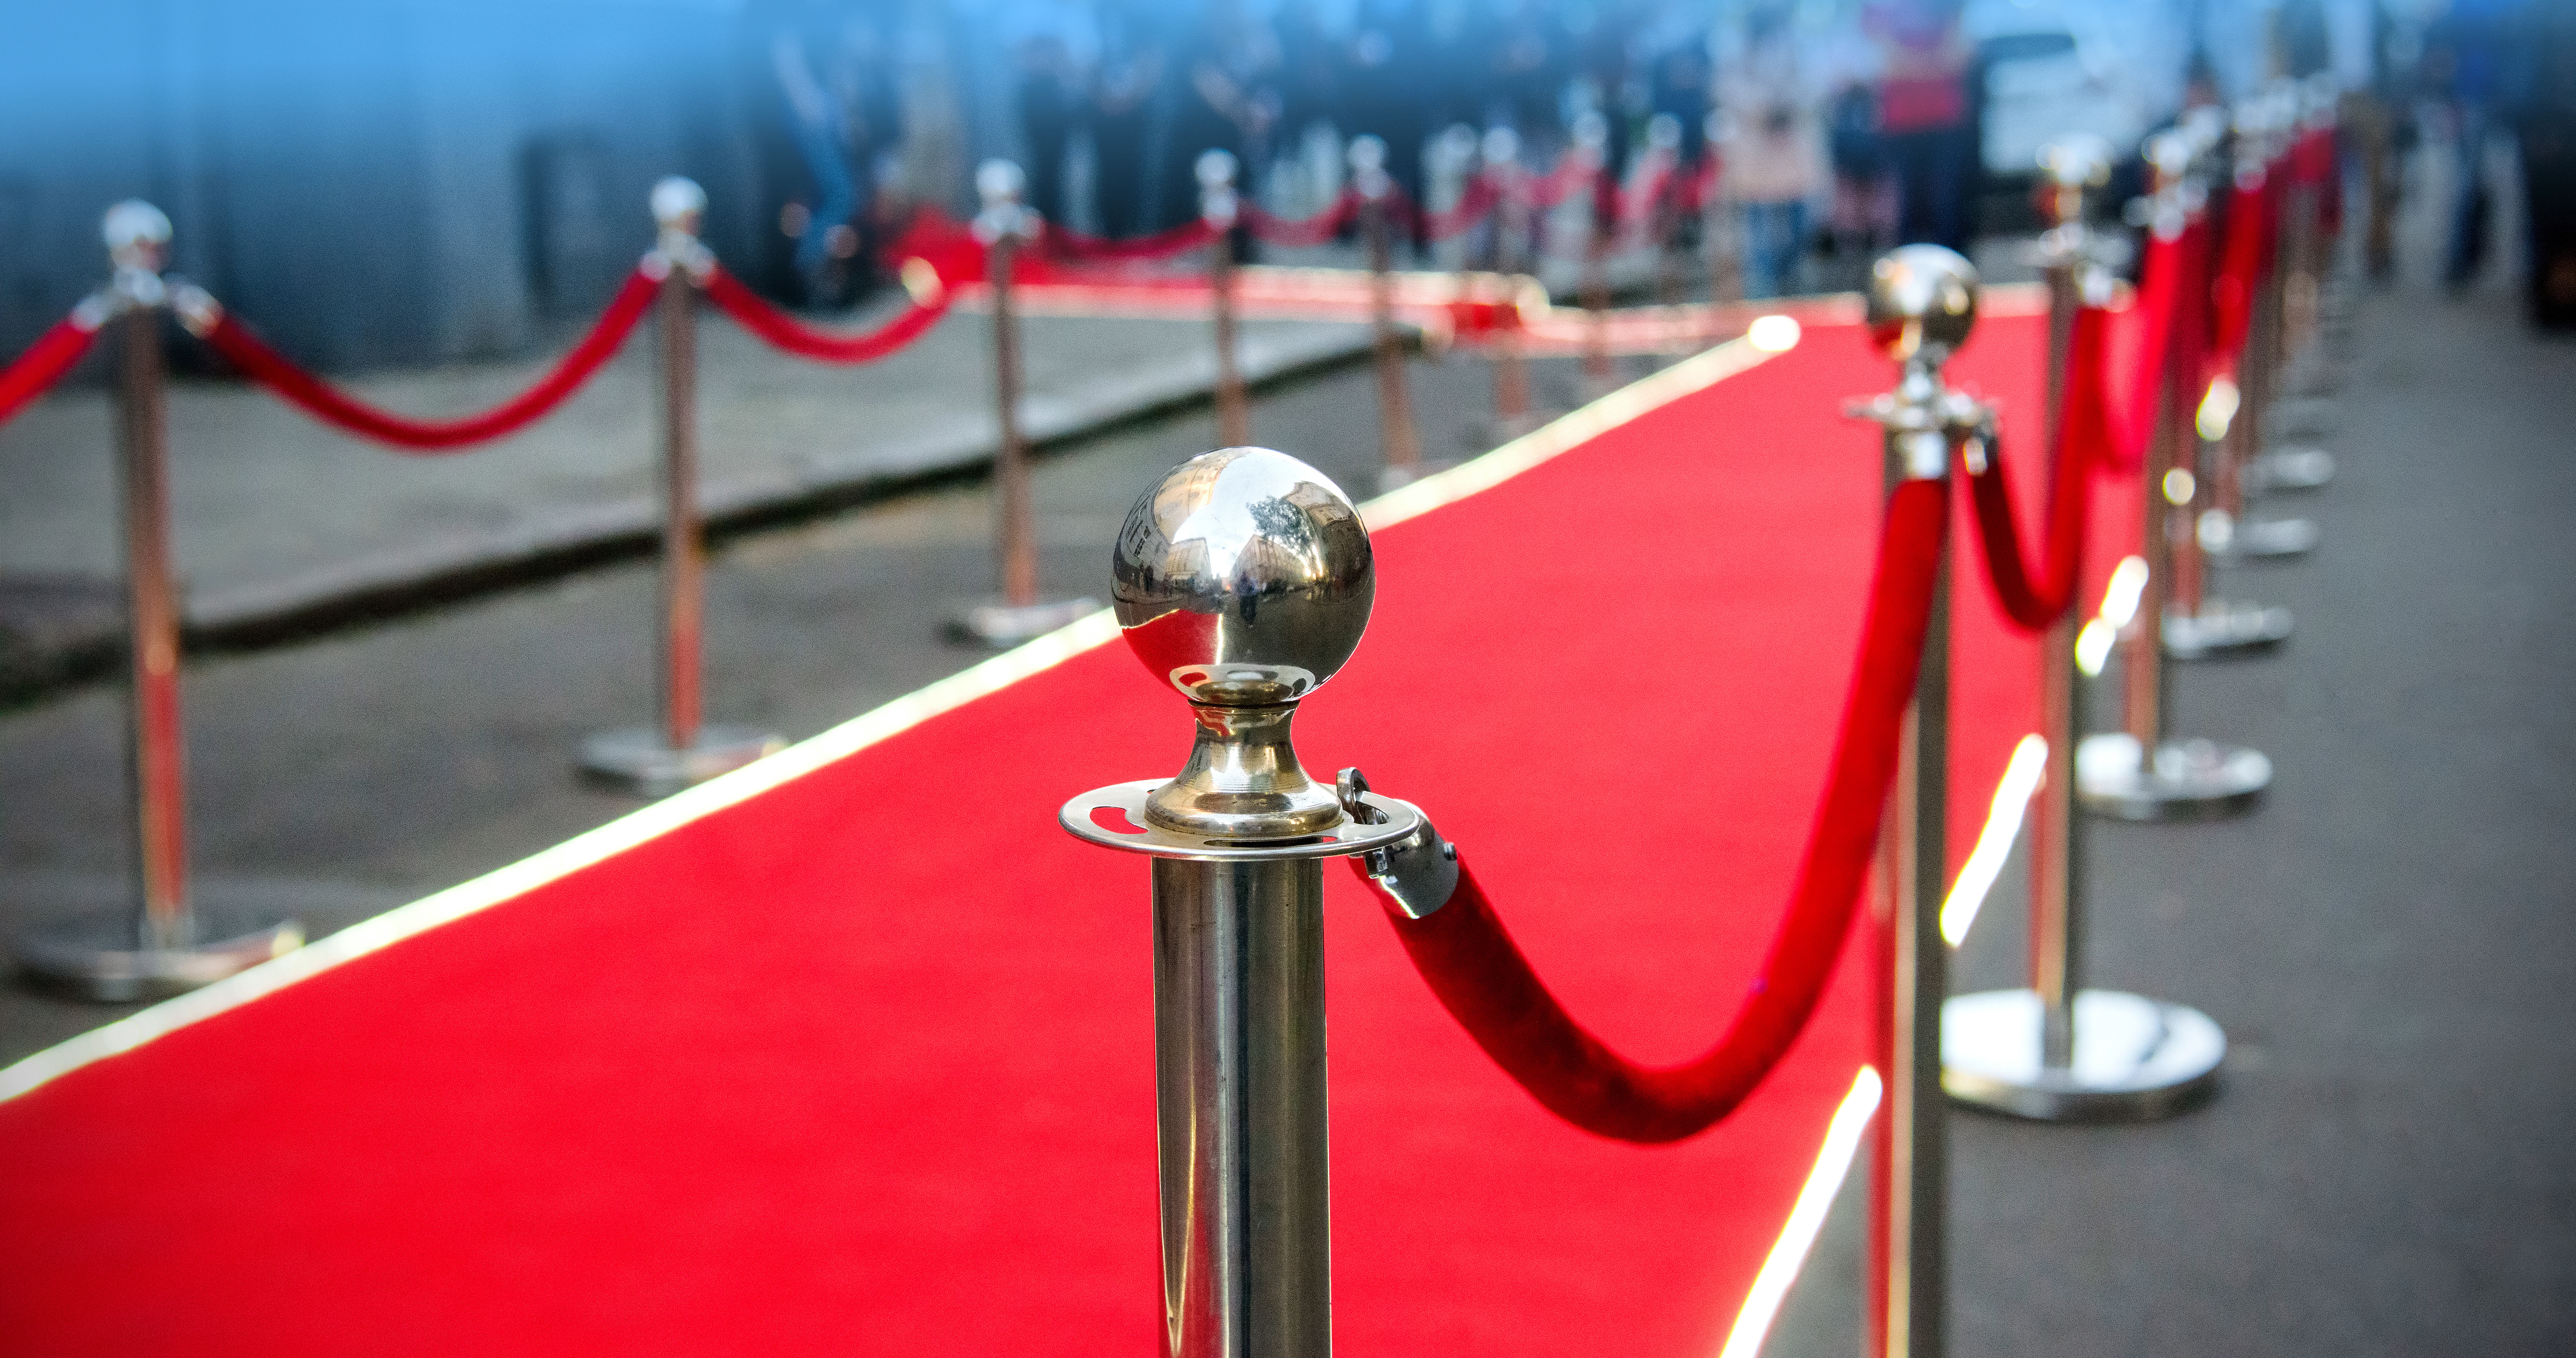 Press Release: Chicago company ensures the health and safety of the 94th Academy Awards